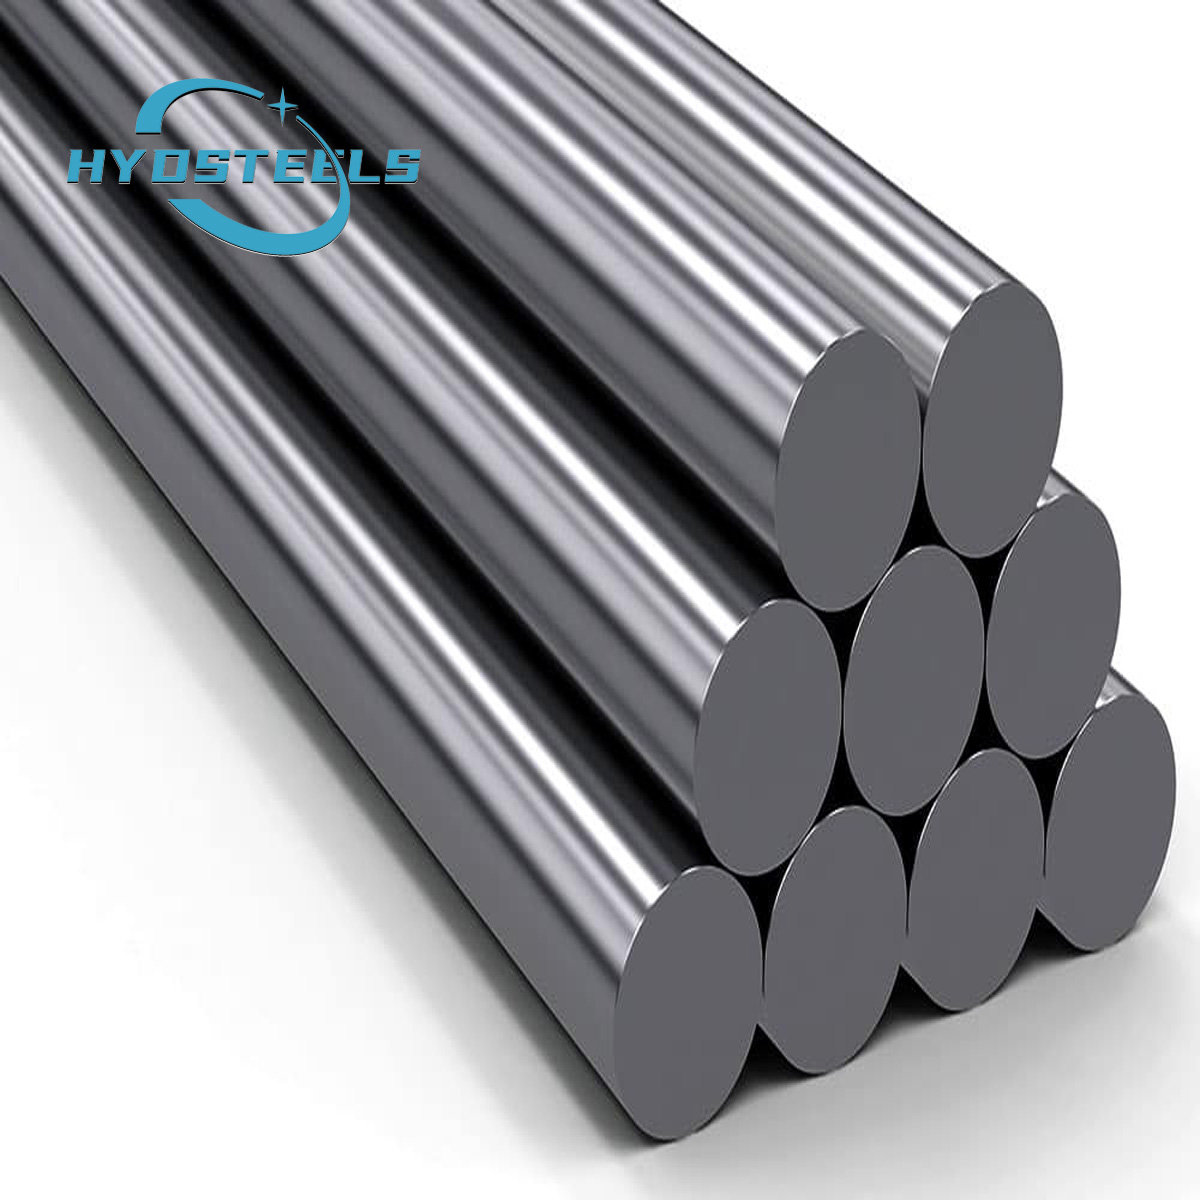 Hard Chrome Plated Steel Rod for Hydraulic Cylinder Suppliers